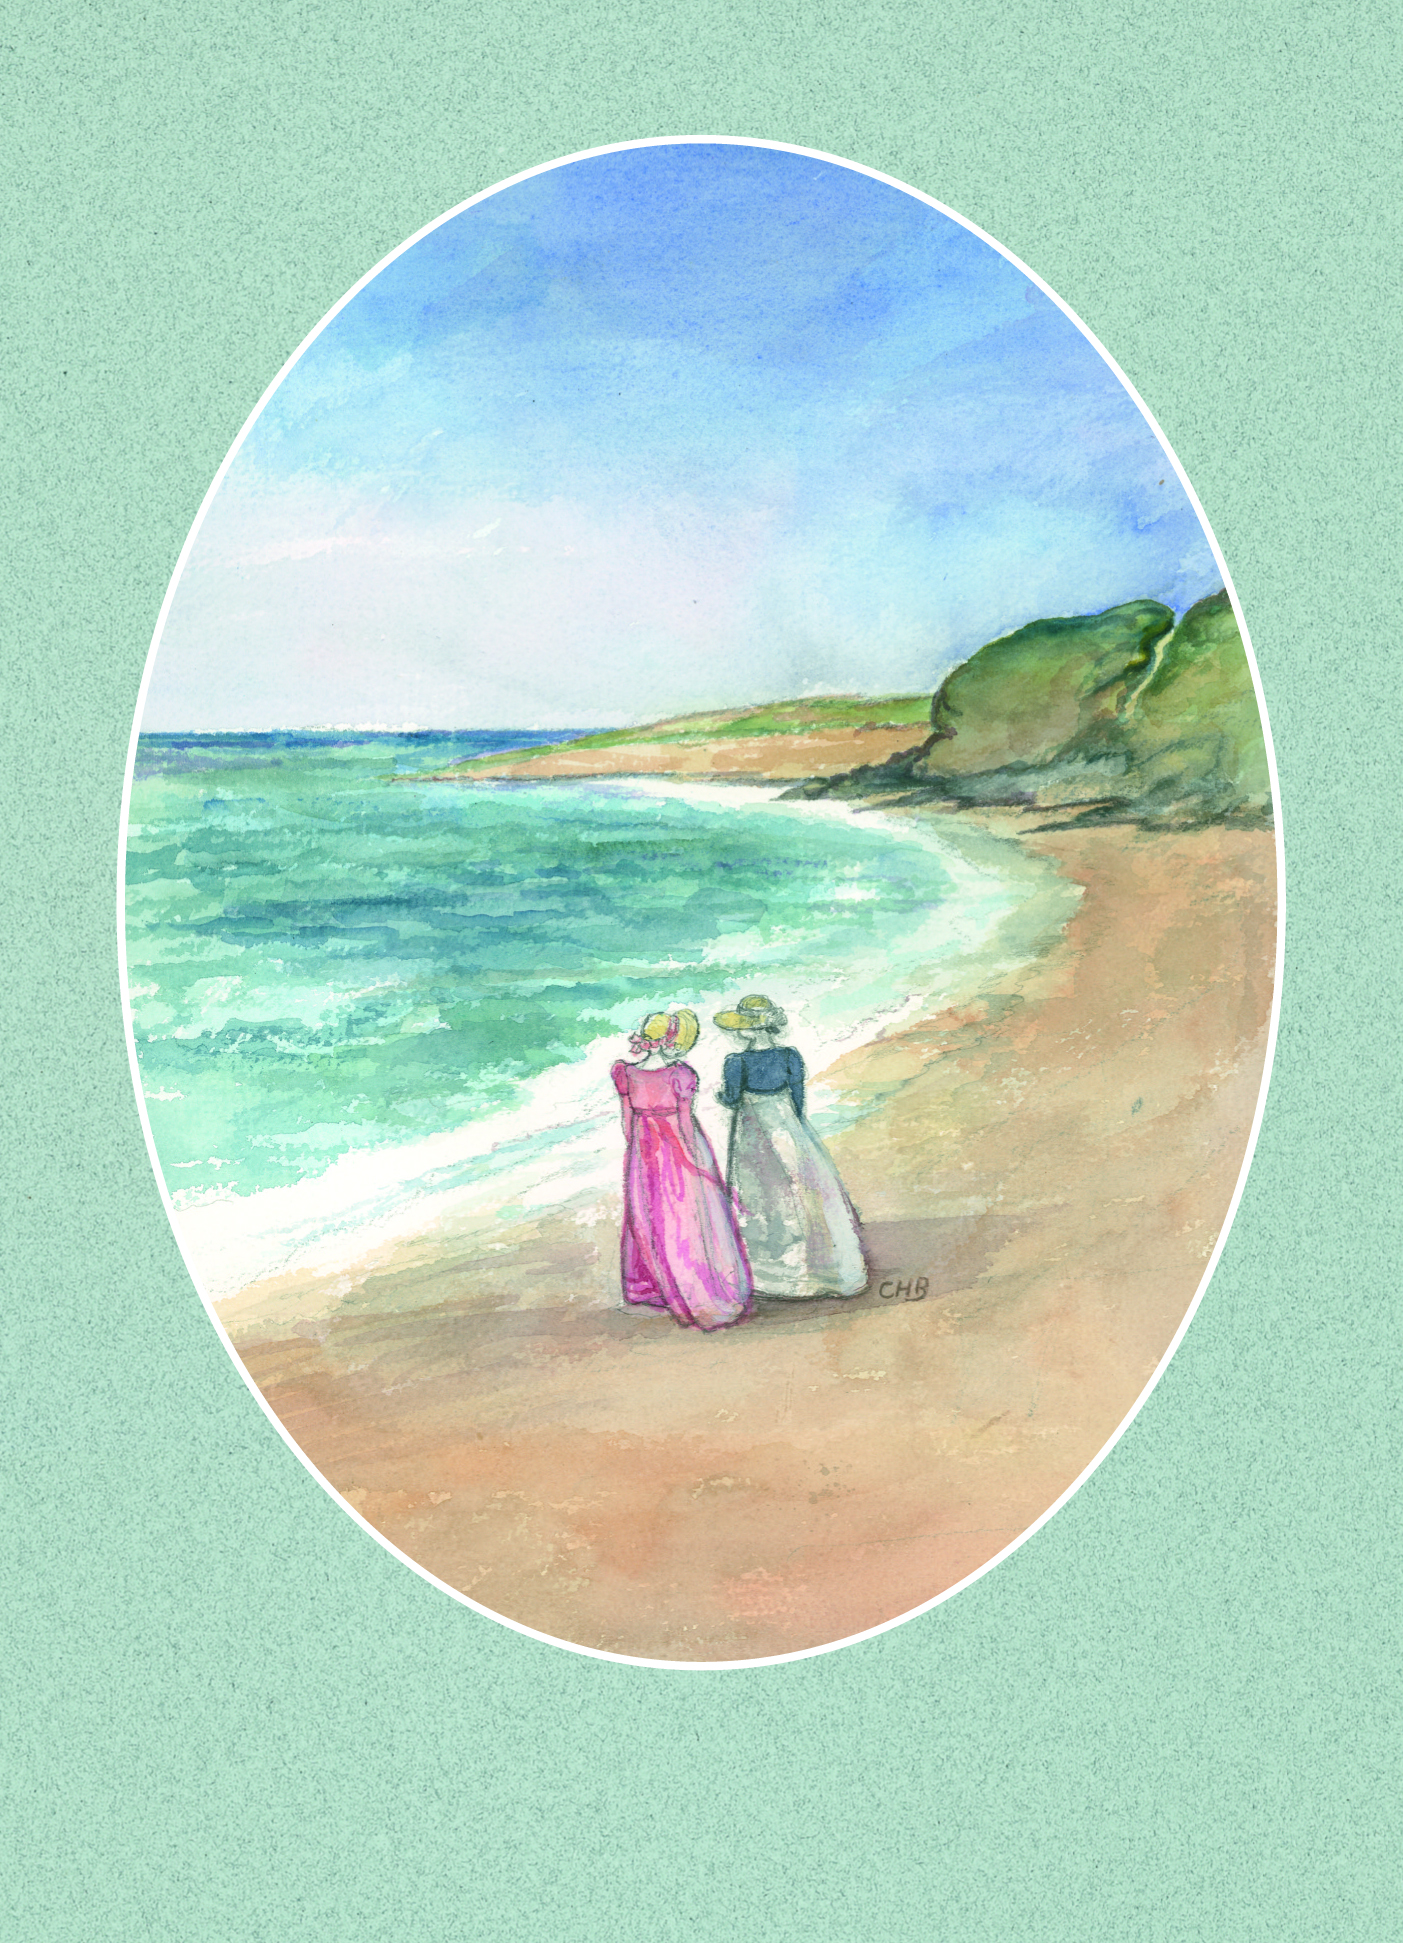 Anne and Henrietta walking along the shoreline - Jane Austen card on sale at Winchester Cathedral gift shop.